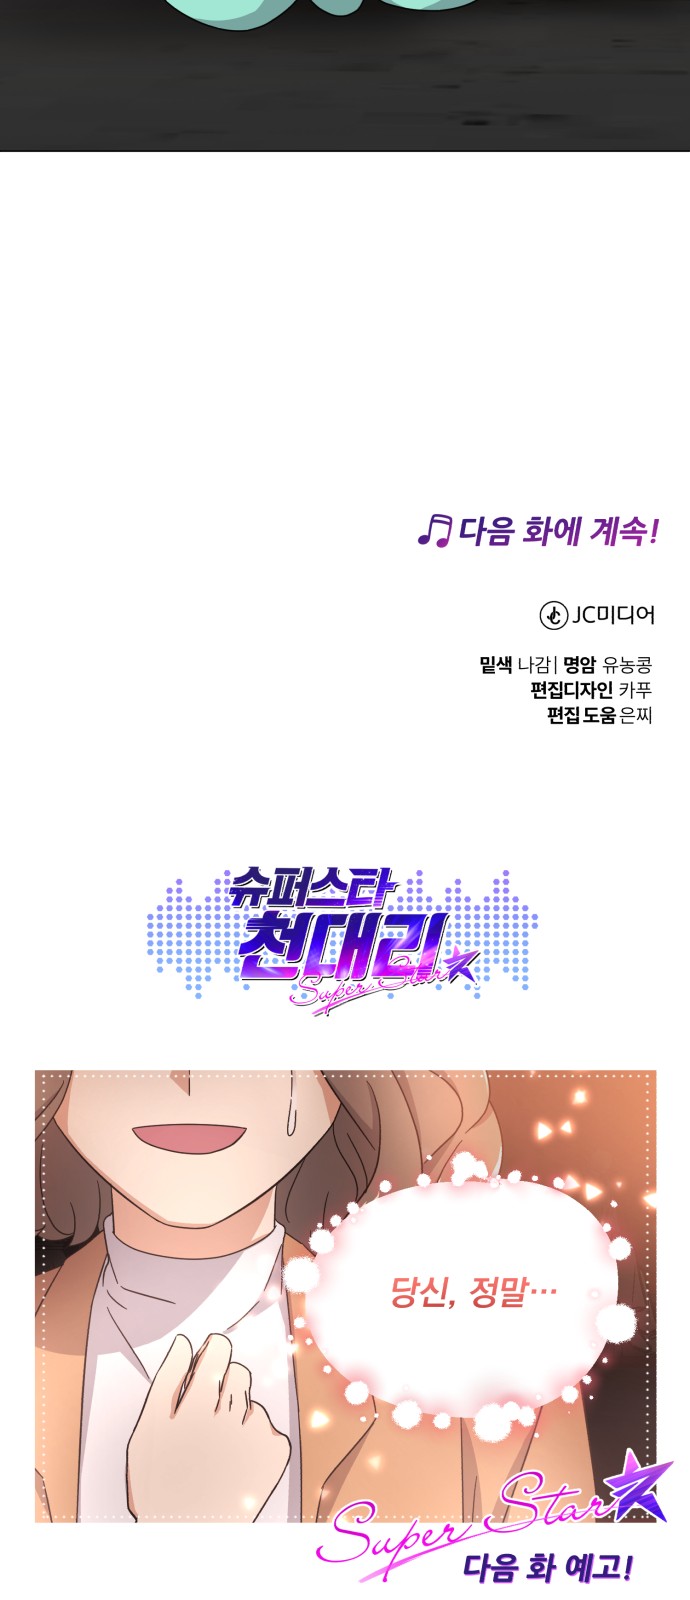 Superstar Cheon Dae-ri - Chapter 45 - Page 83